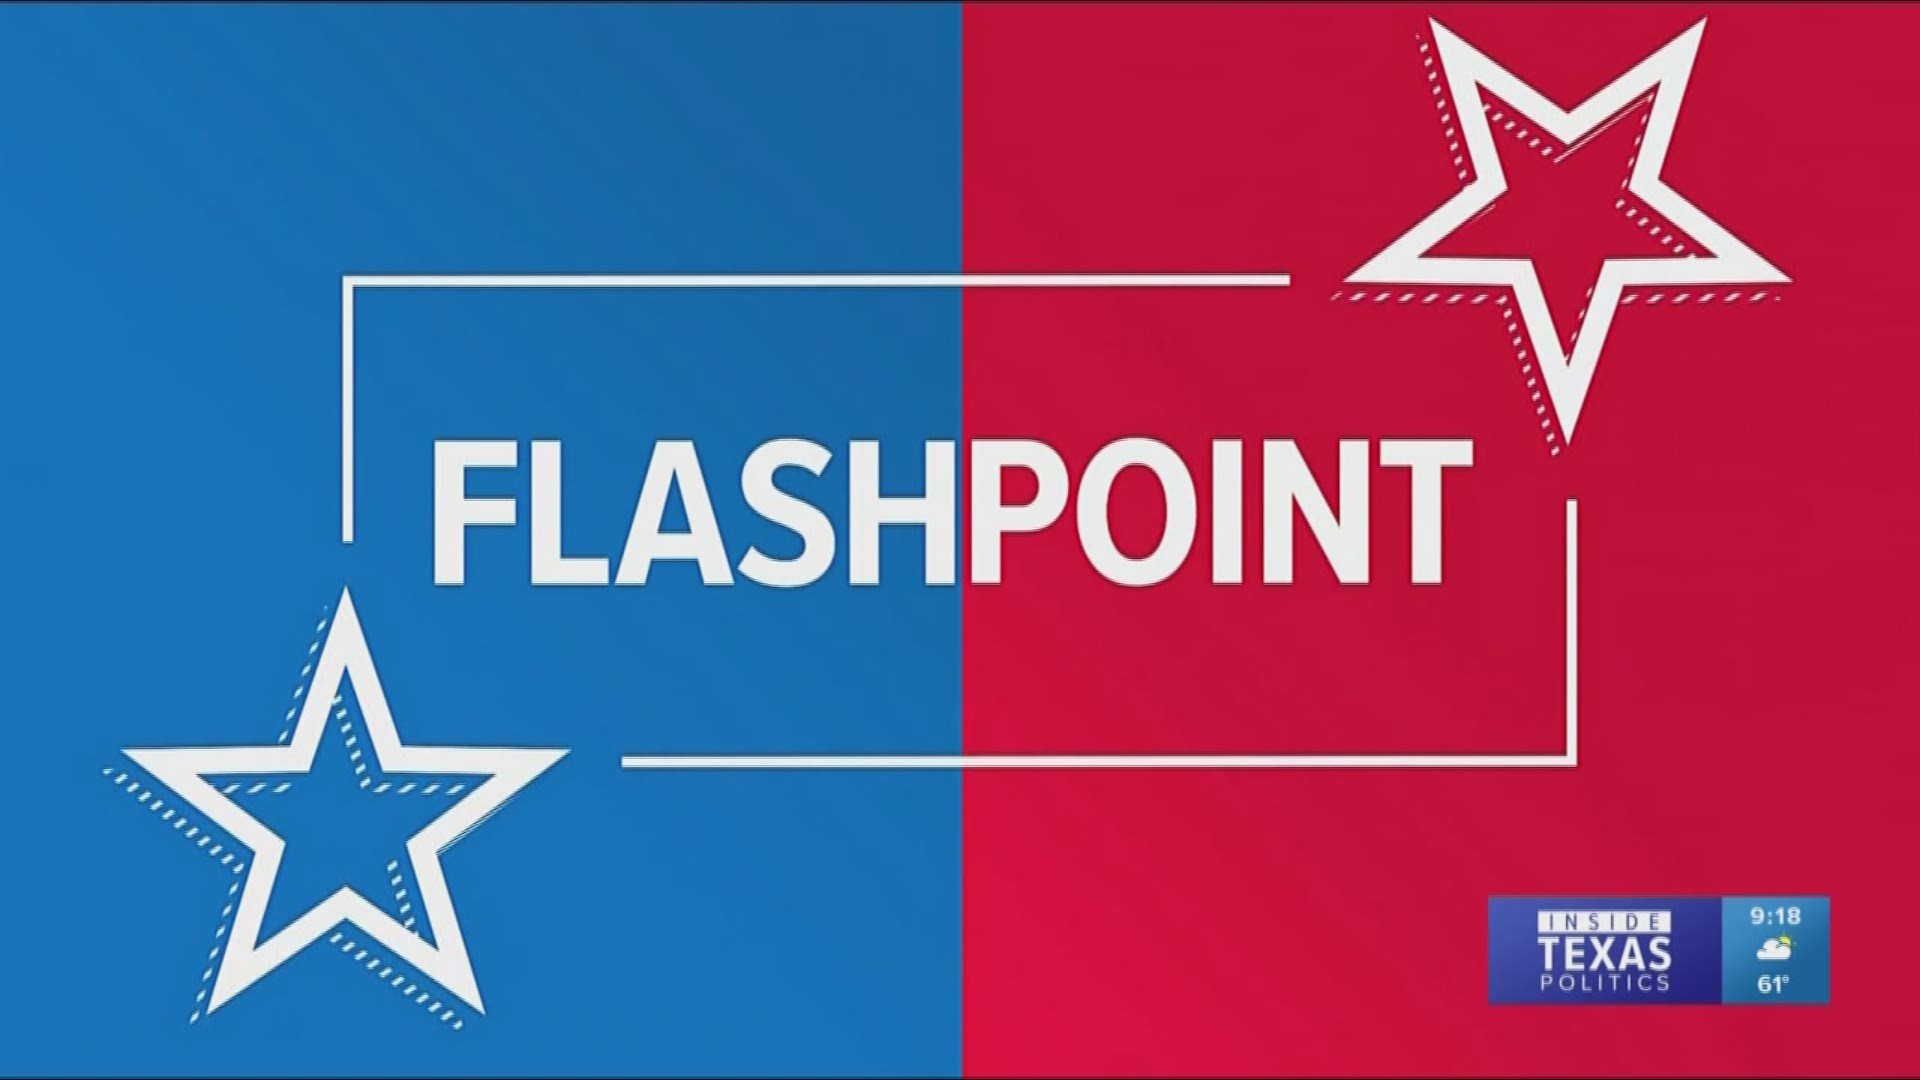 The polls in the U.S. Senate race range from Senator Ted Cruz holding a nine percentage point lead over challenger Beto O'Rourke to O'Rourke winning by two. The debate over the exact meaning of these polls sparked this week's Flashpoint.